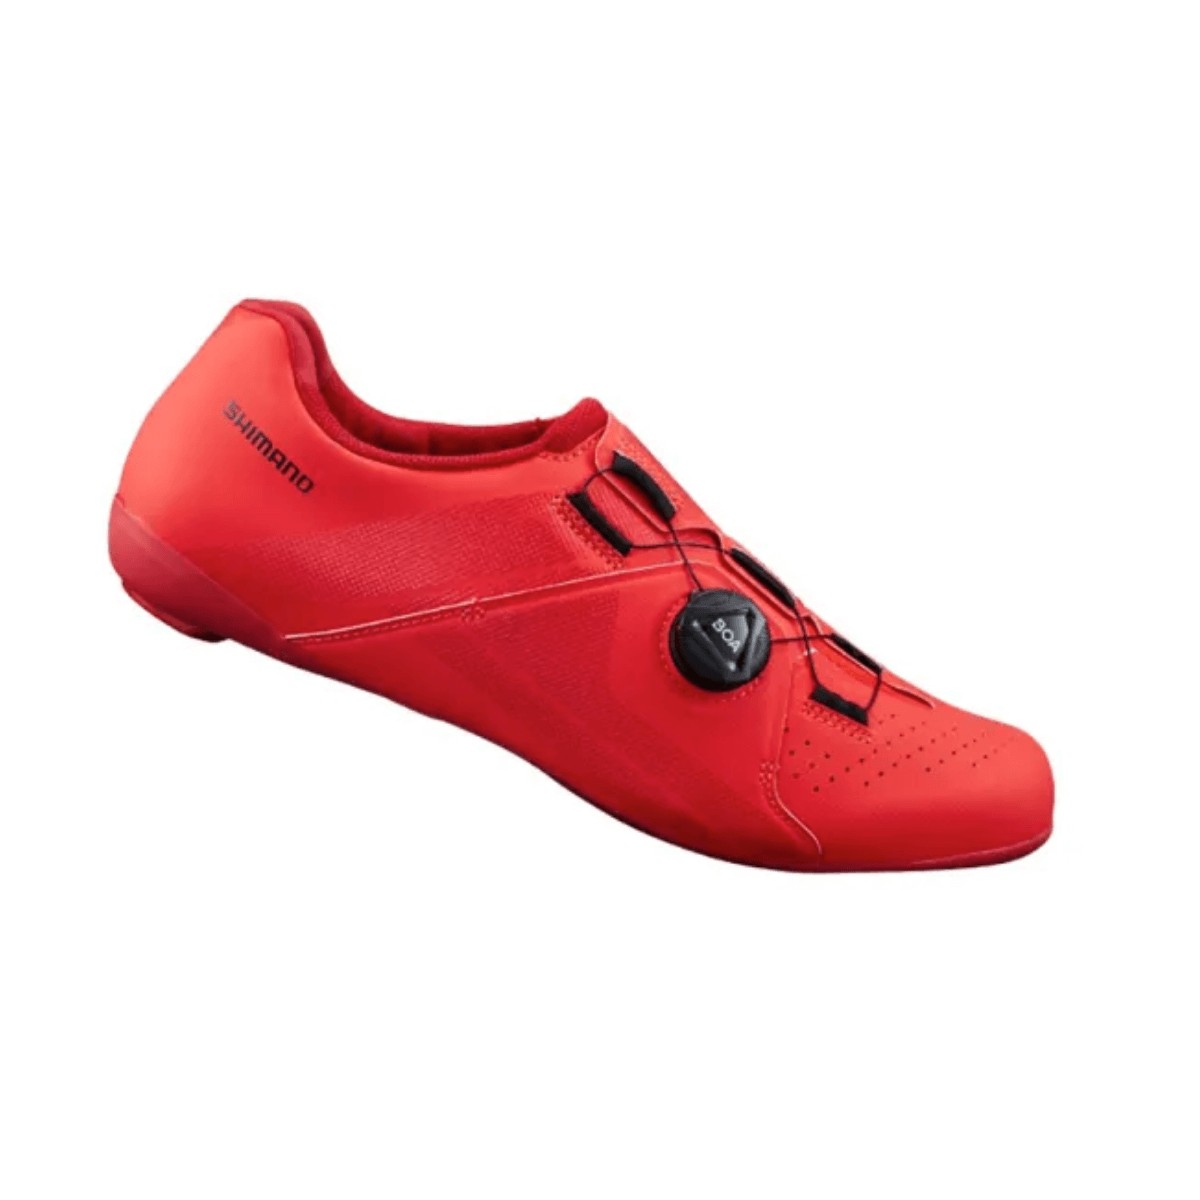 Shimano RC3 Red Black Shoes, Size 47 - EUR